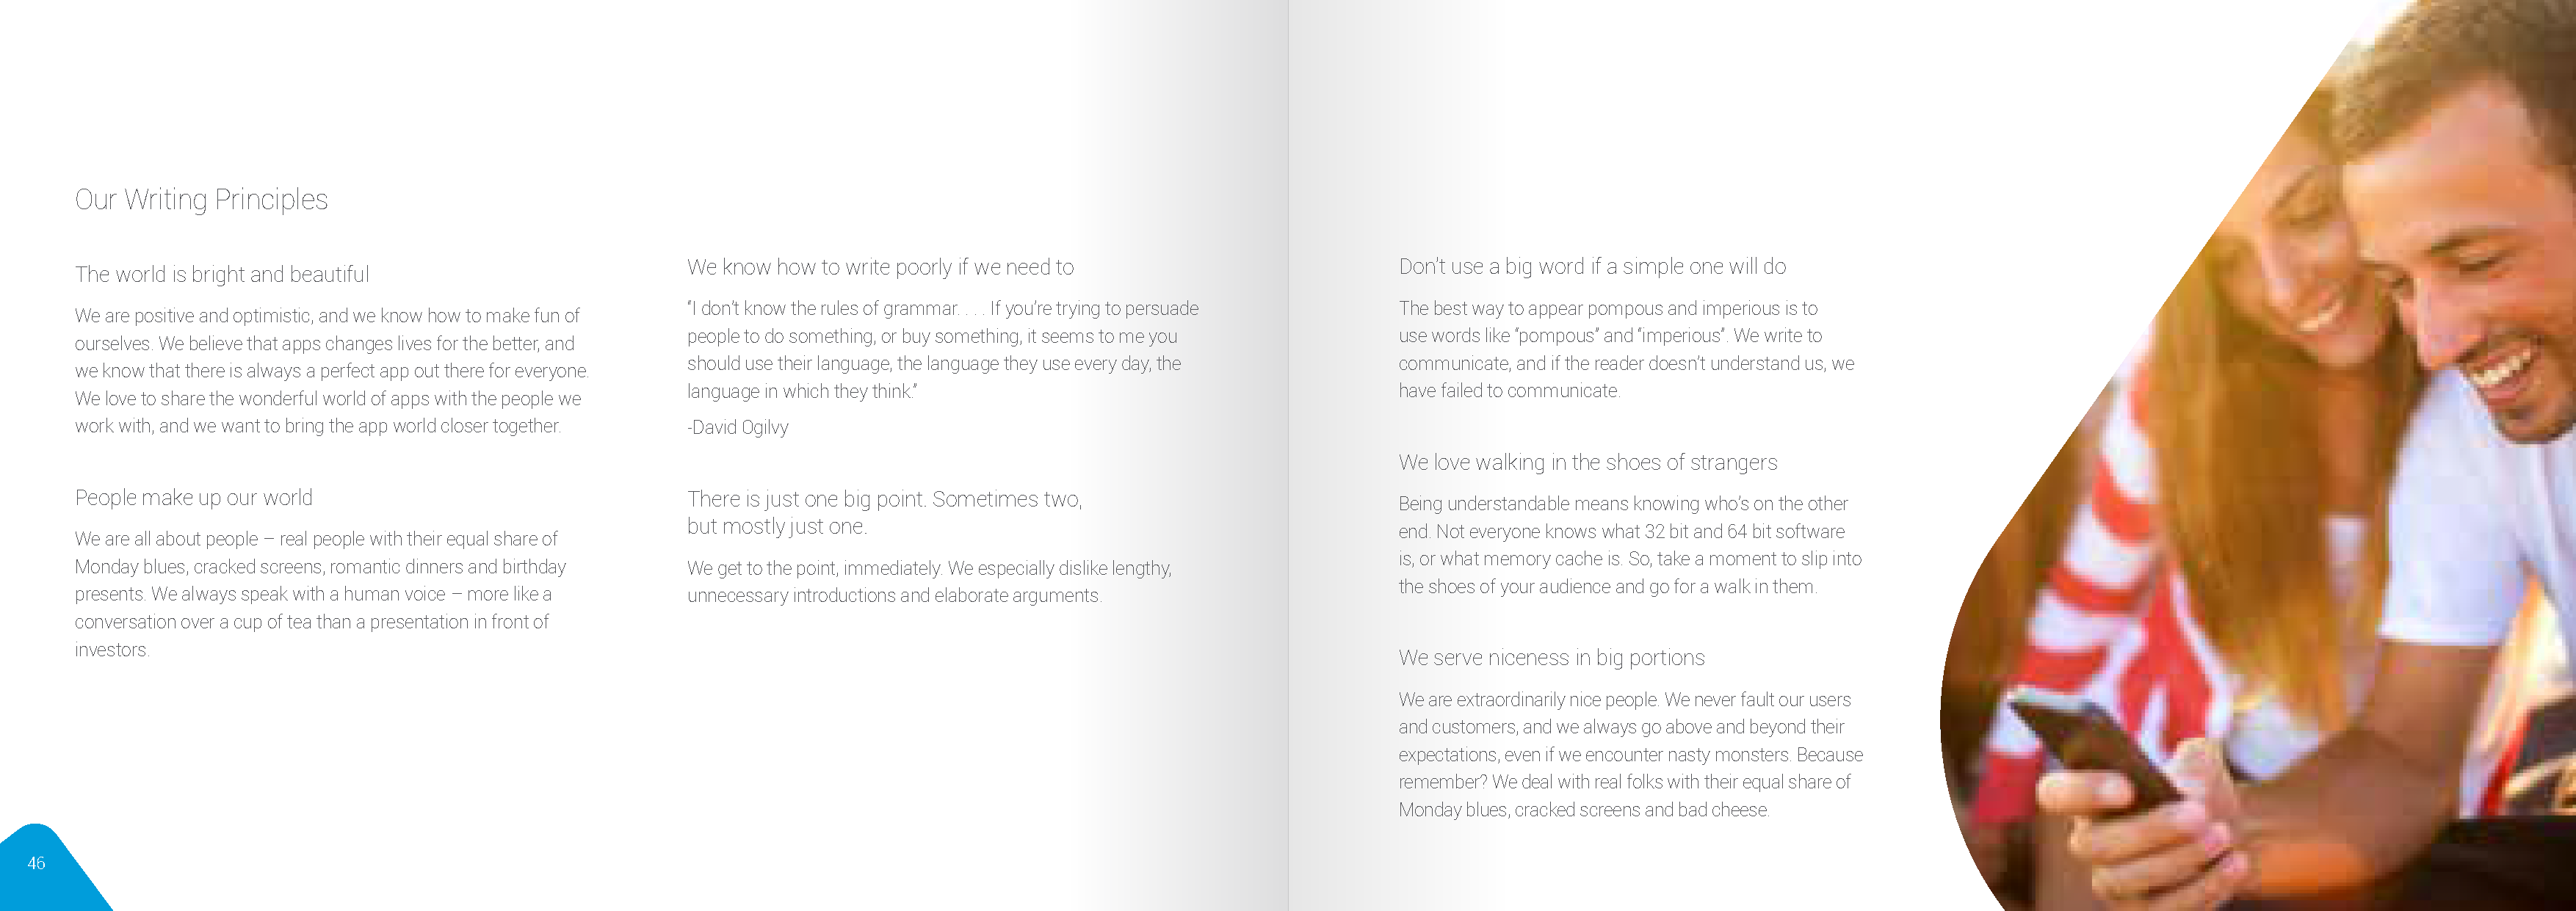 Softonic-Brand-Guidelines_Page_24